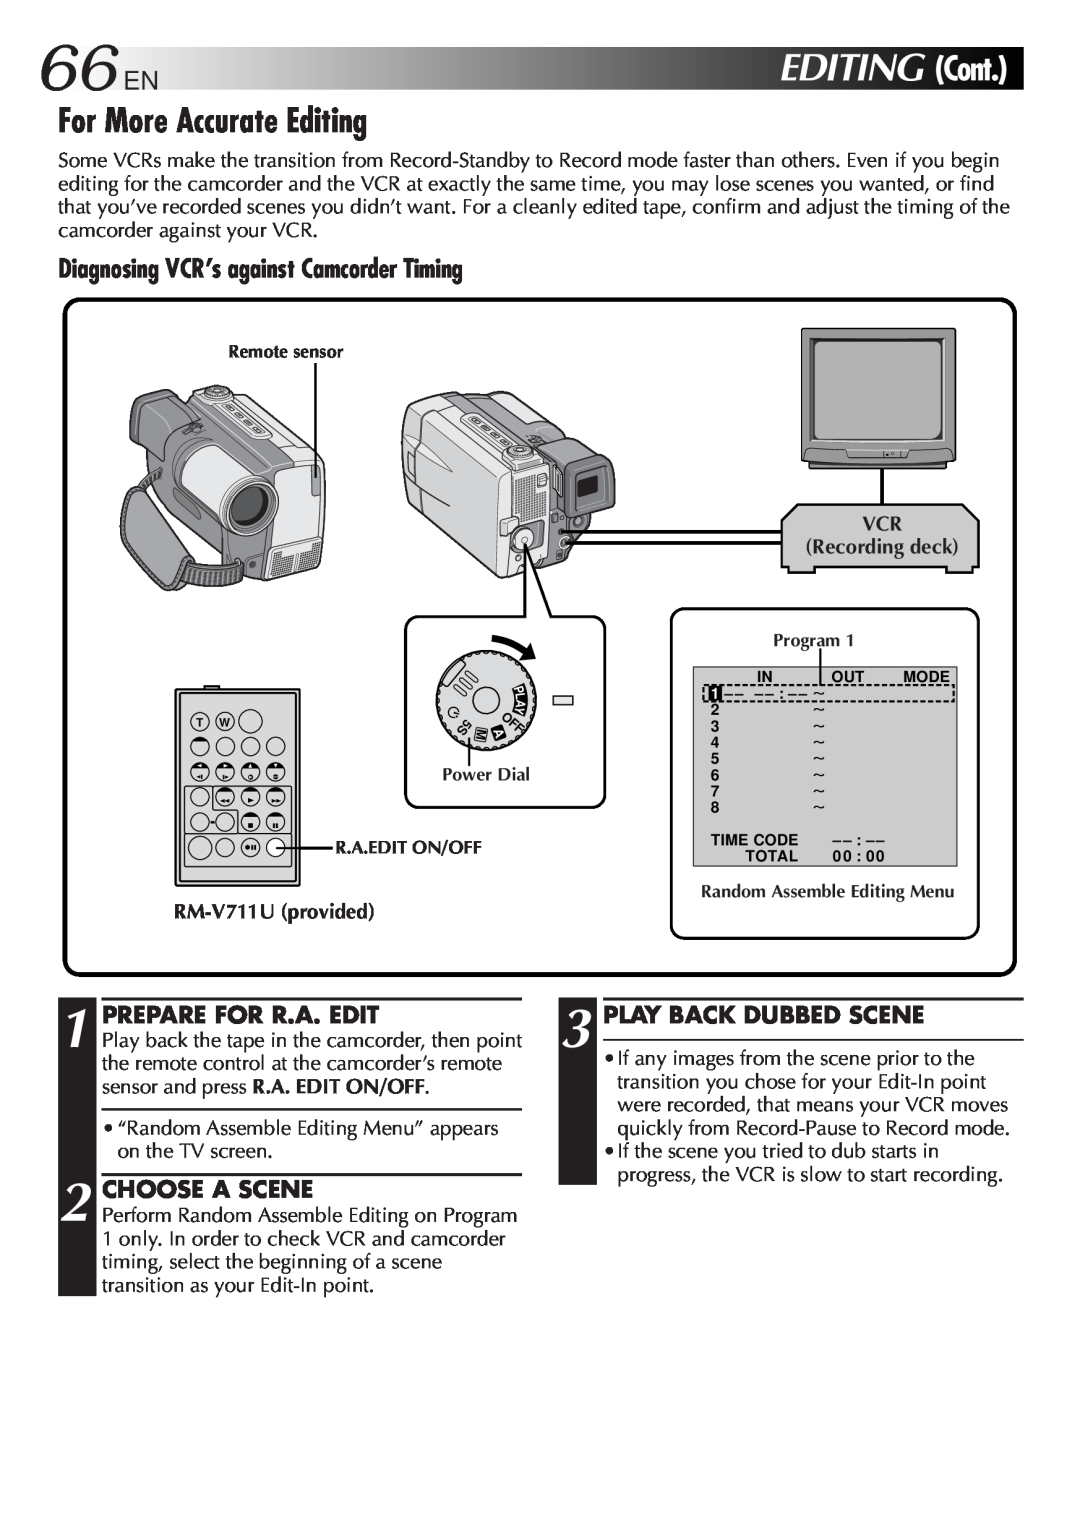 JVC GR-DVL9000 manual 66ENEDITINGCont, For More Accurate Editing, Diagnosing VCR’s against Camcorder Timing, Choose A Scene 